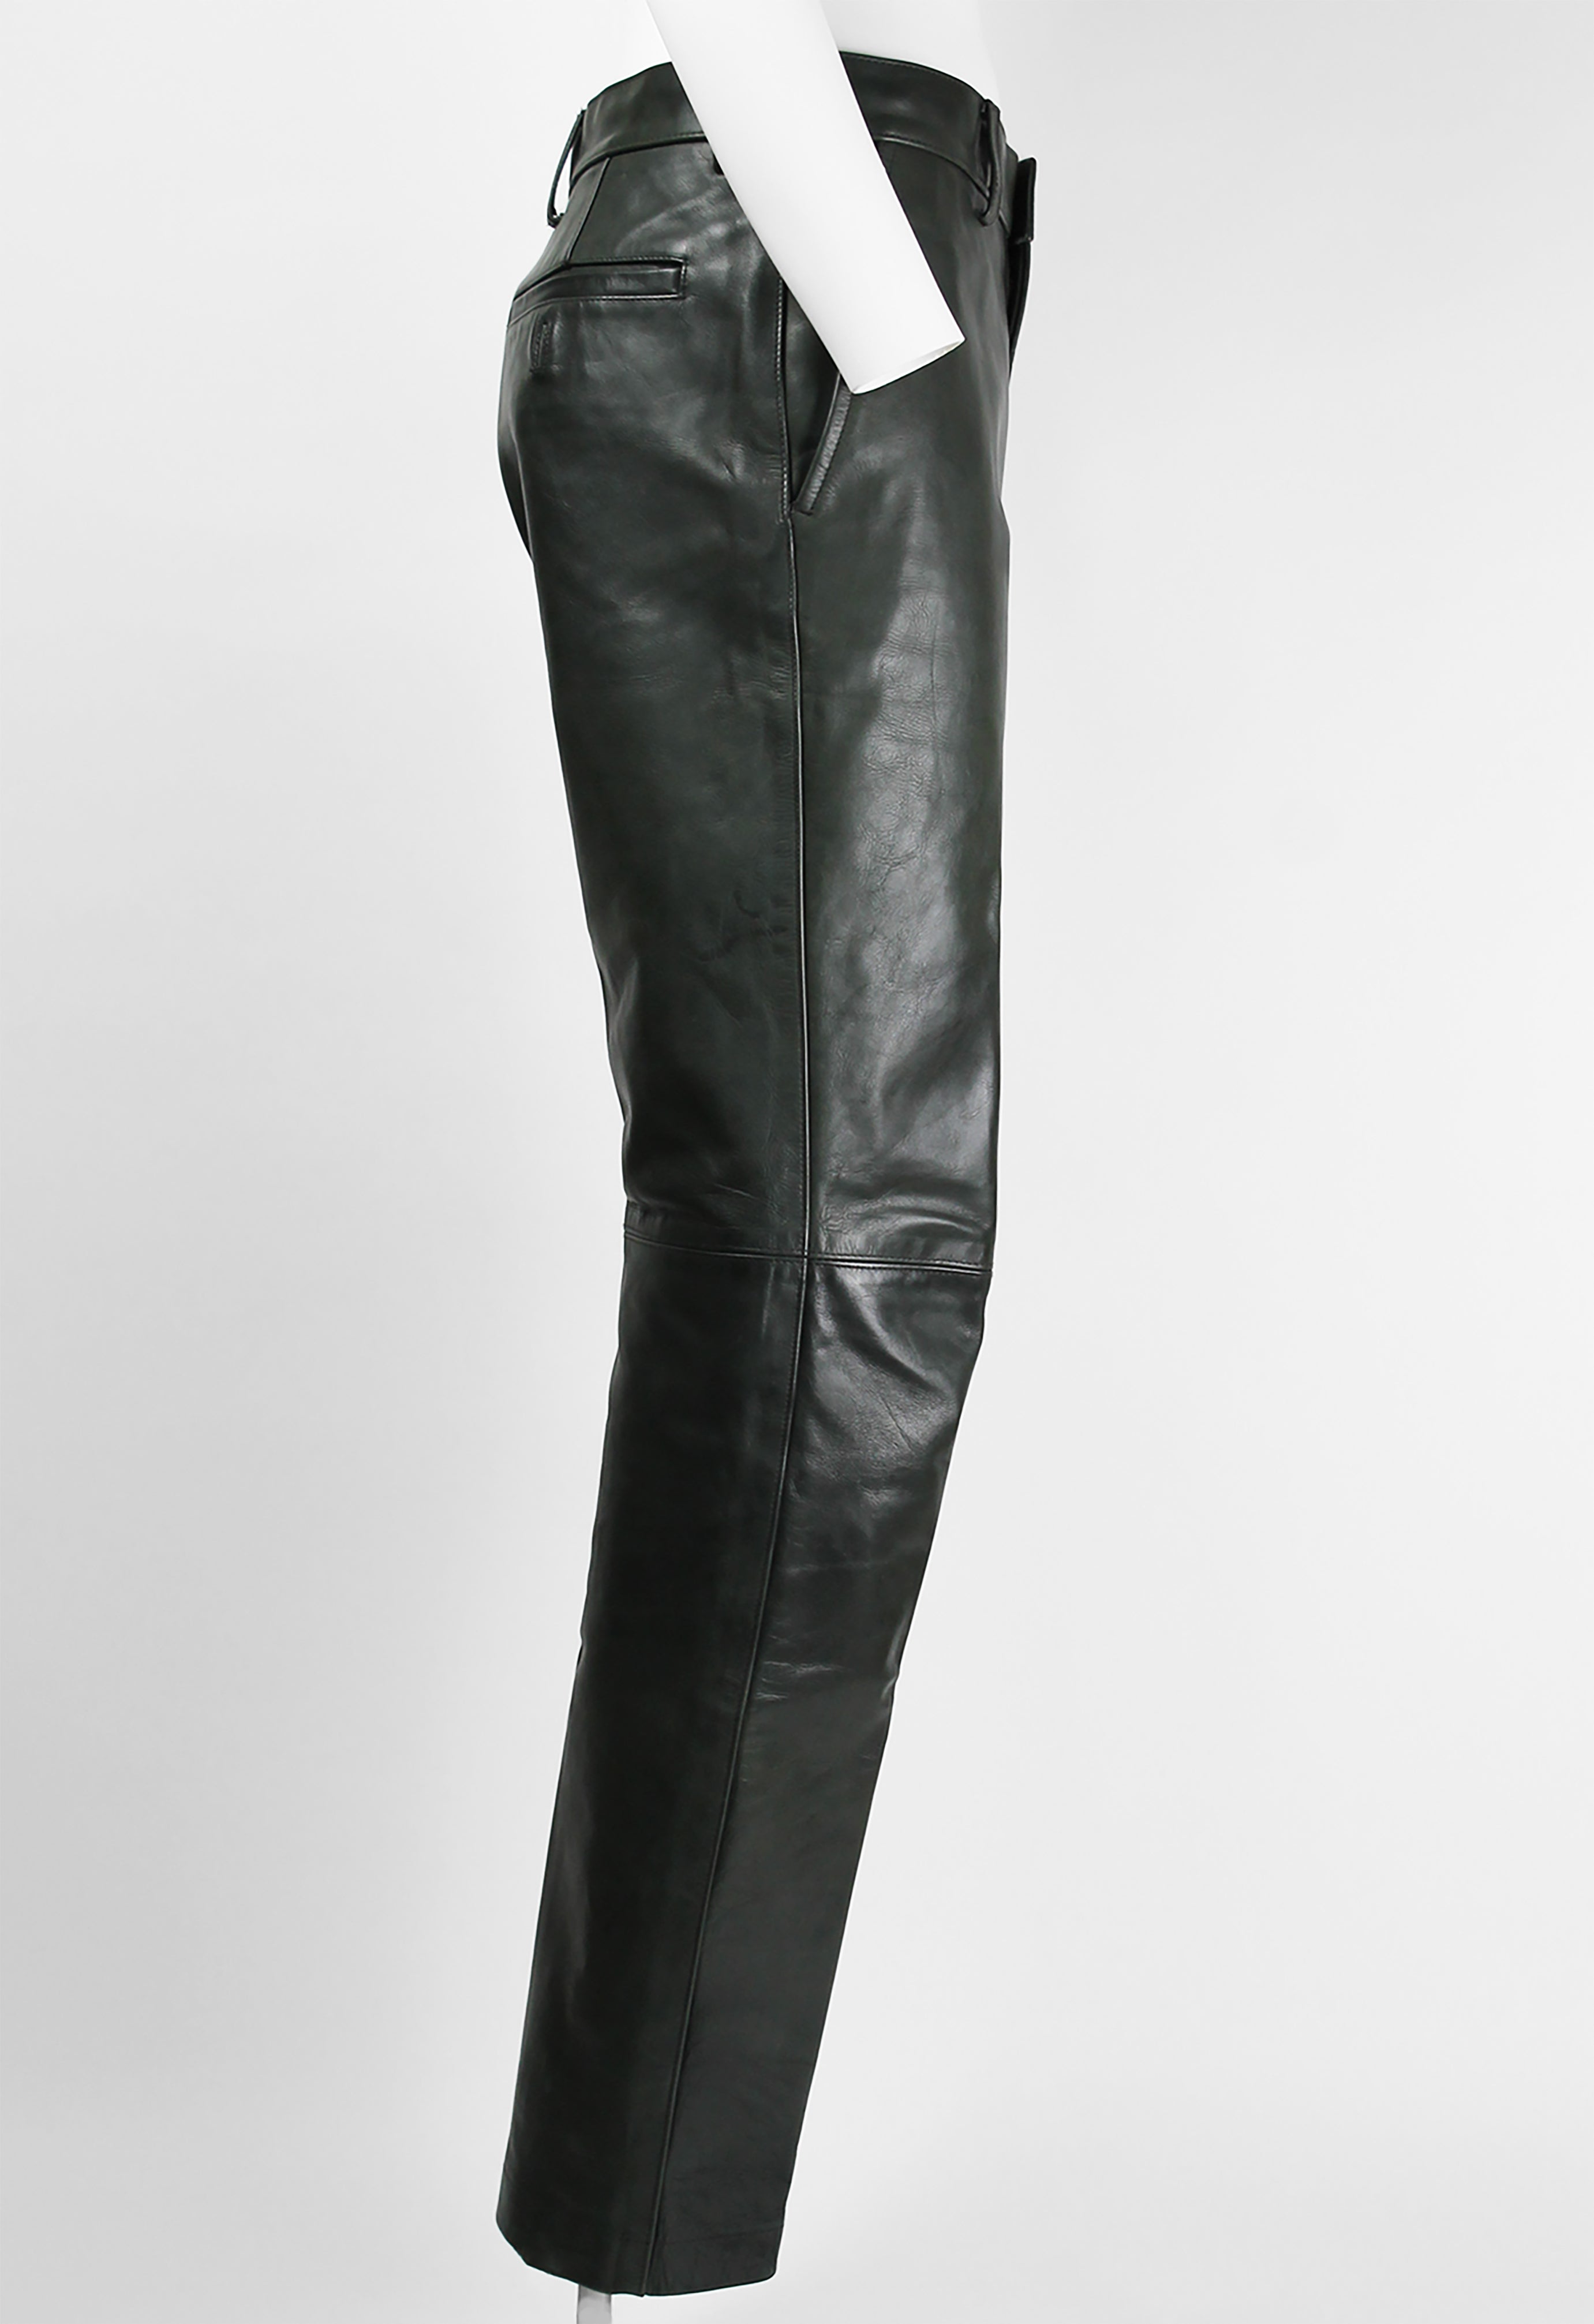 Zara SS22 BNWT Limited Edition Leather Trousers Size Small 5479 951  eBay